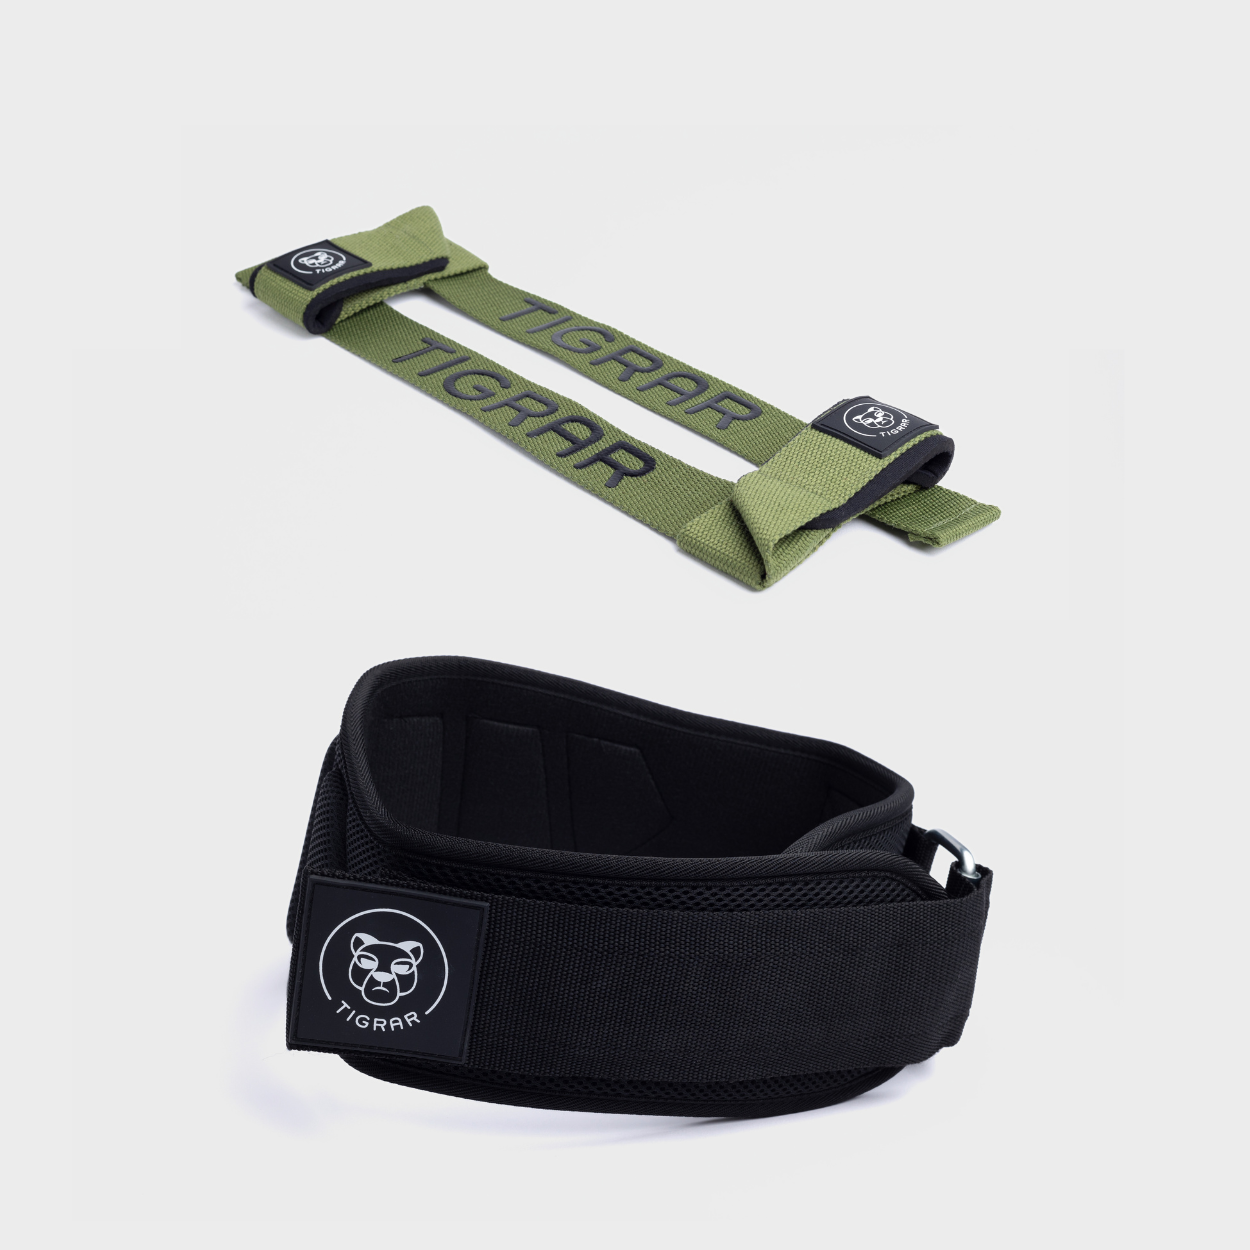 Weight lifting belt and straps